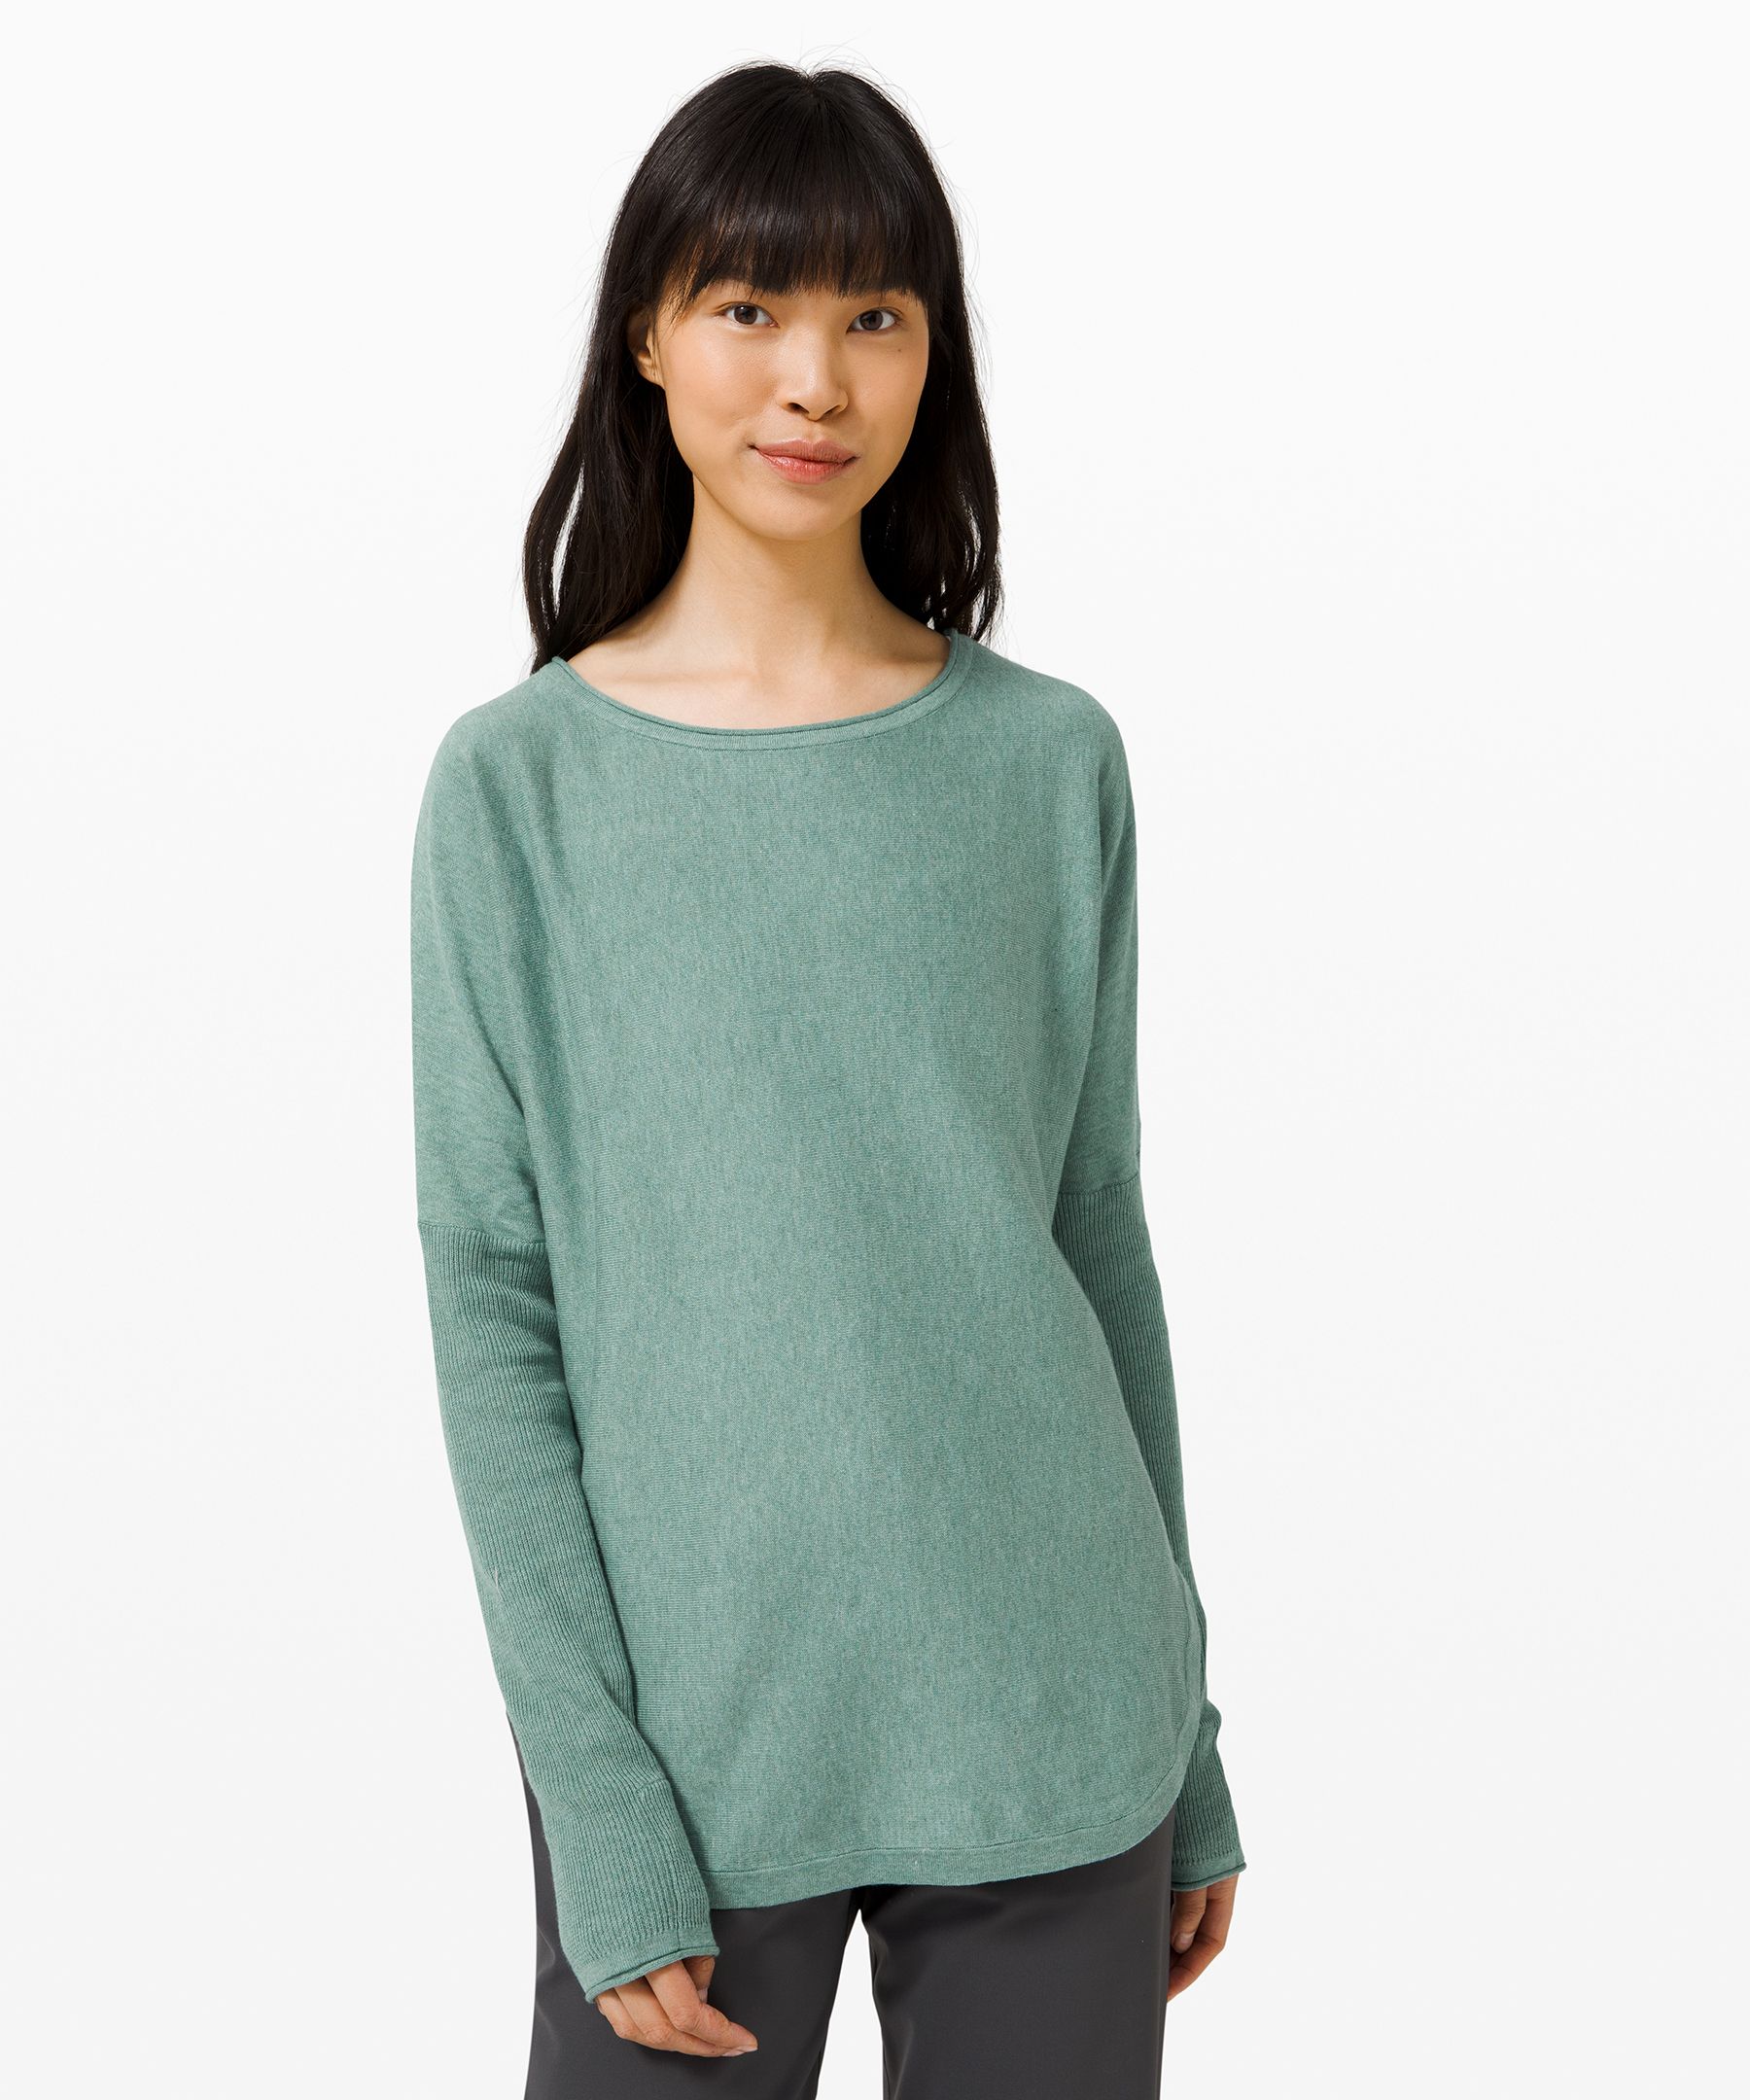 Lululemon Take It All In Sweater In Heathered Tidewater Teal